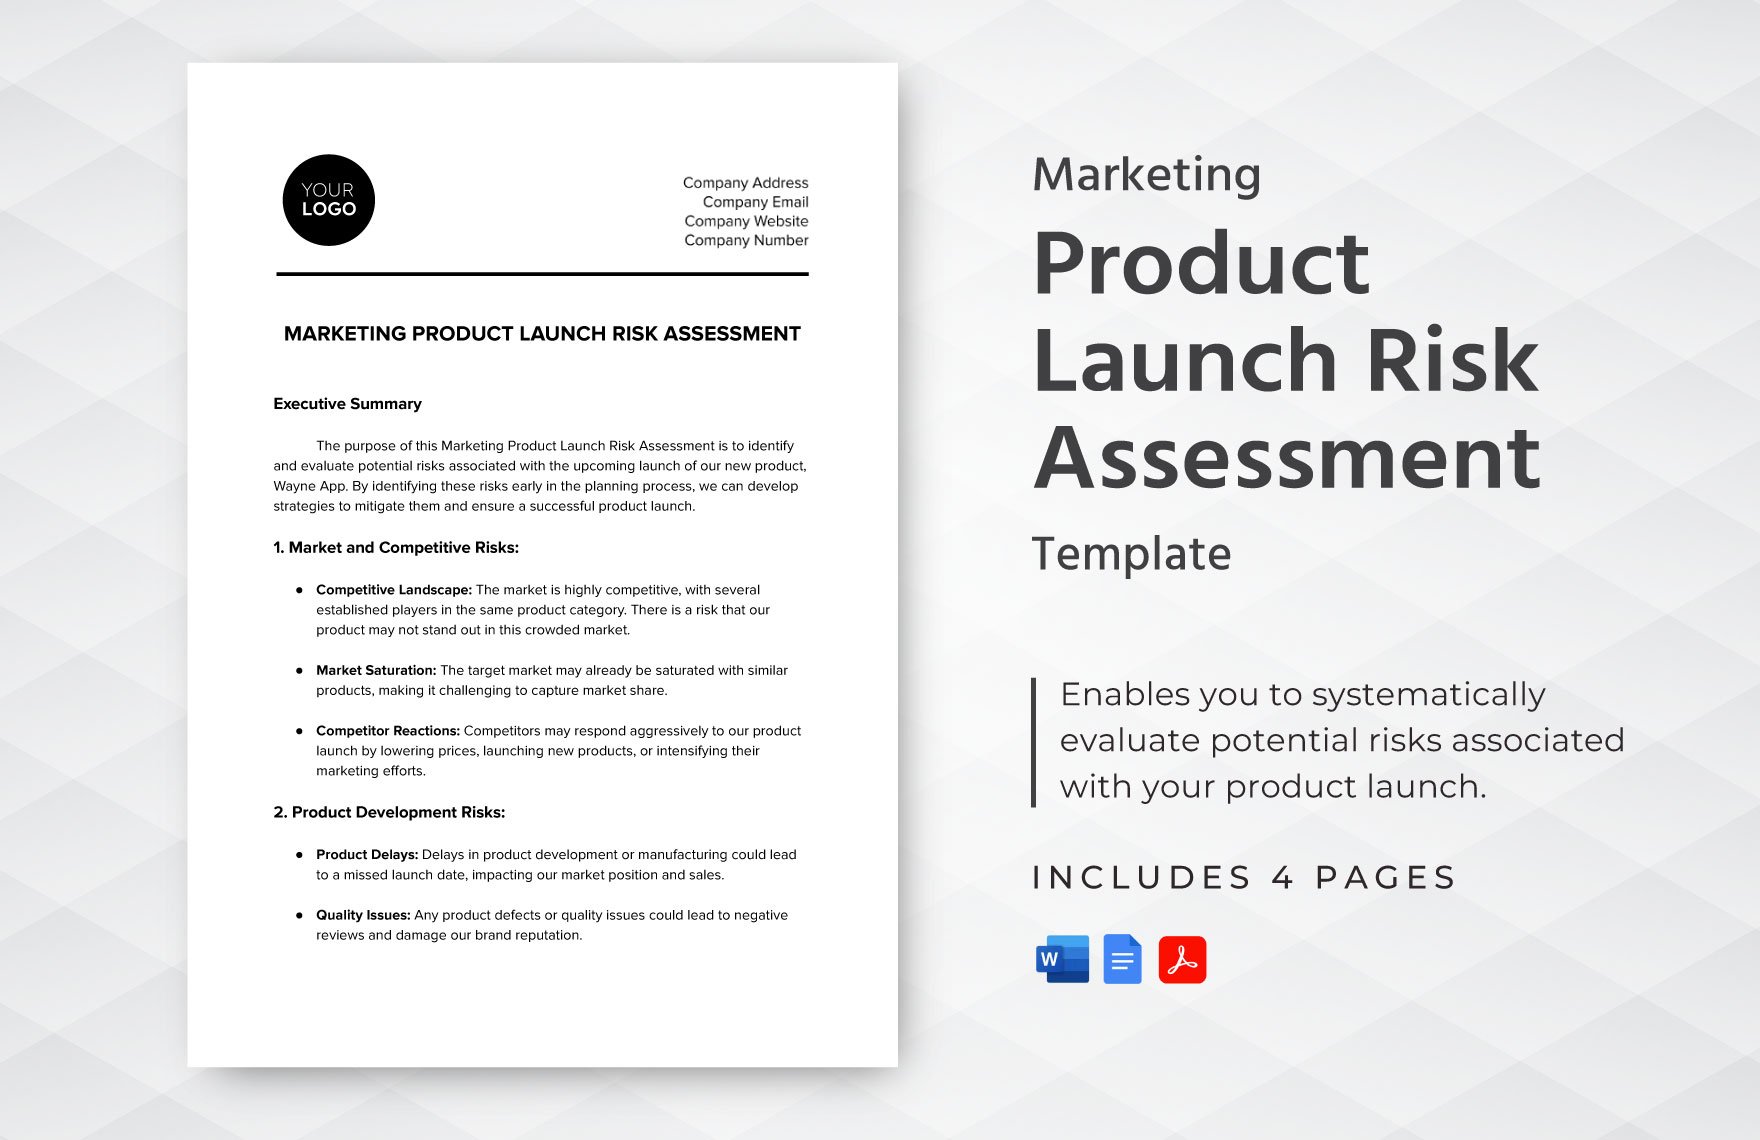 Marketing Product Launch Risk Assessment Template in Word, Google Docs, PDF